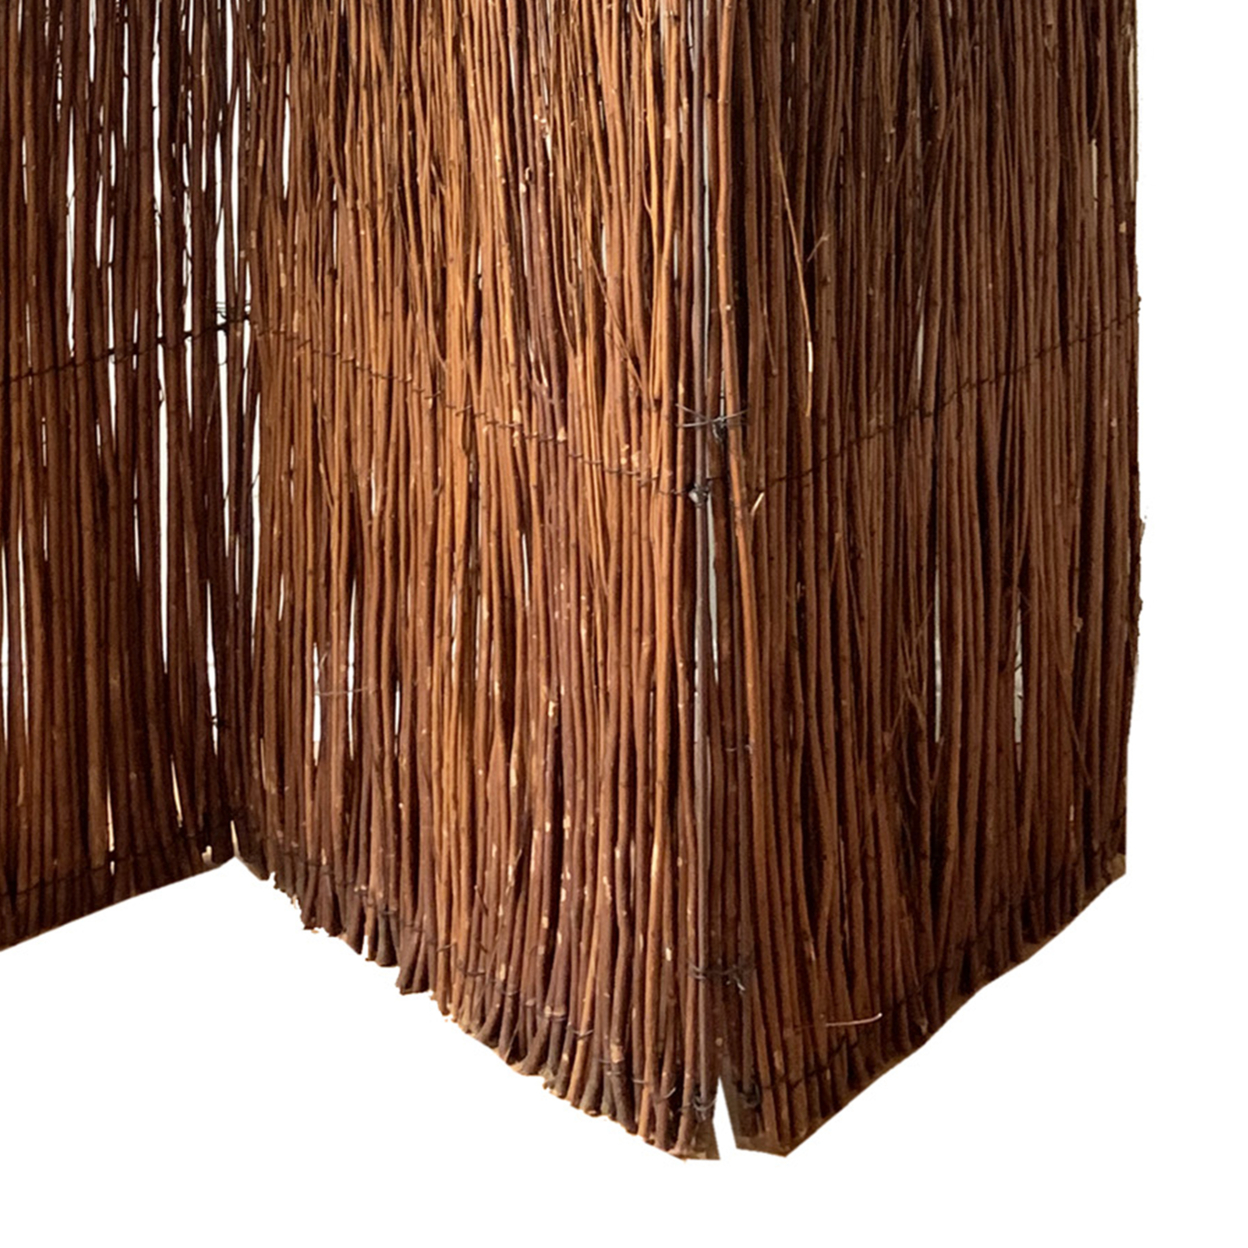 3 Panel Vertically Aligned Willow Branches Room Divider, Brown- Saltoro Sherpi